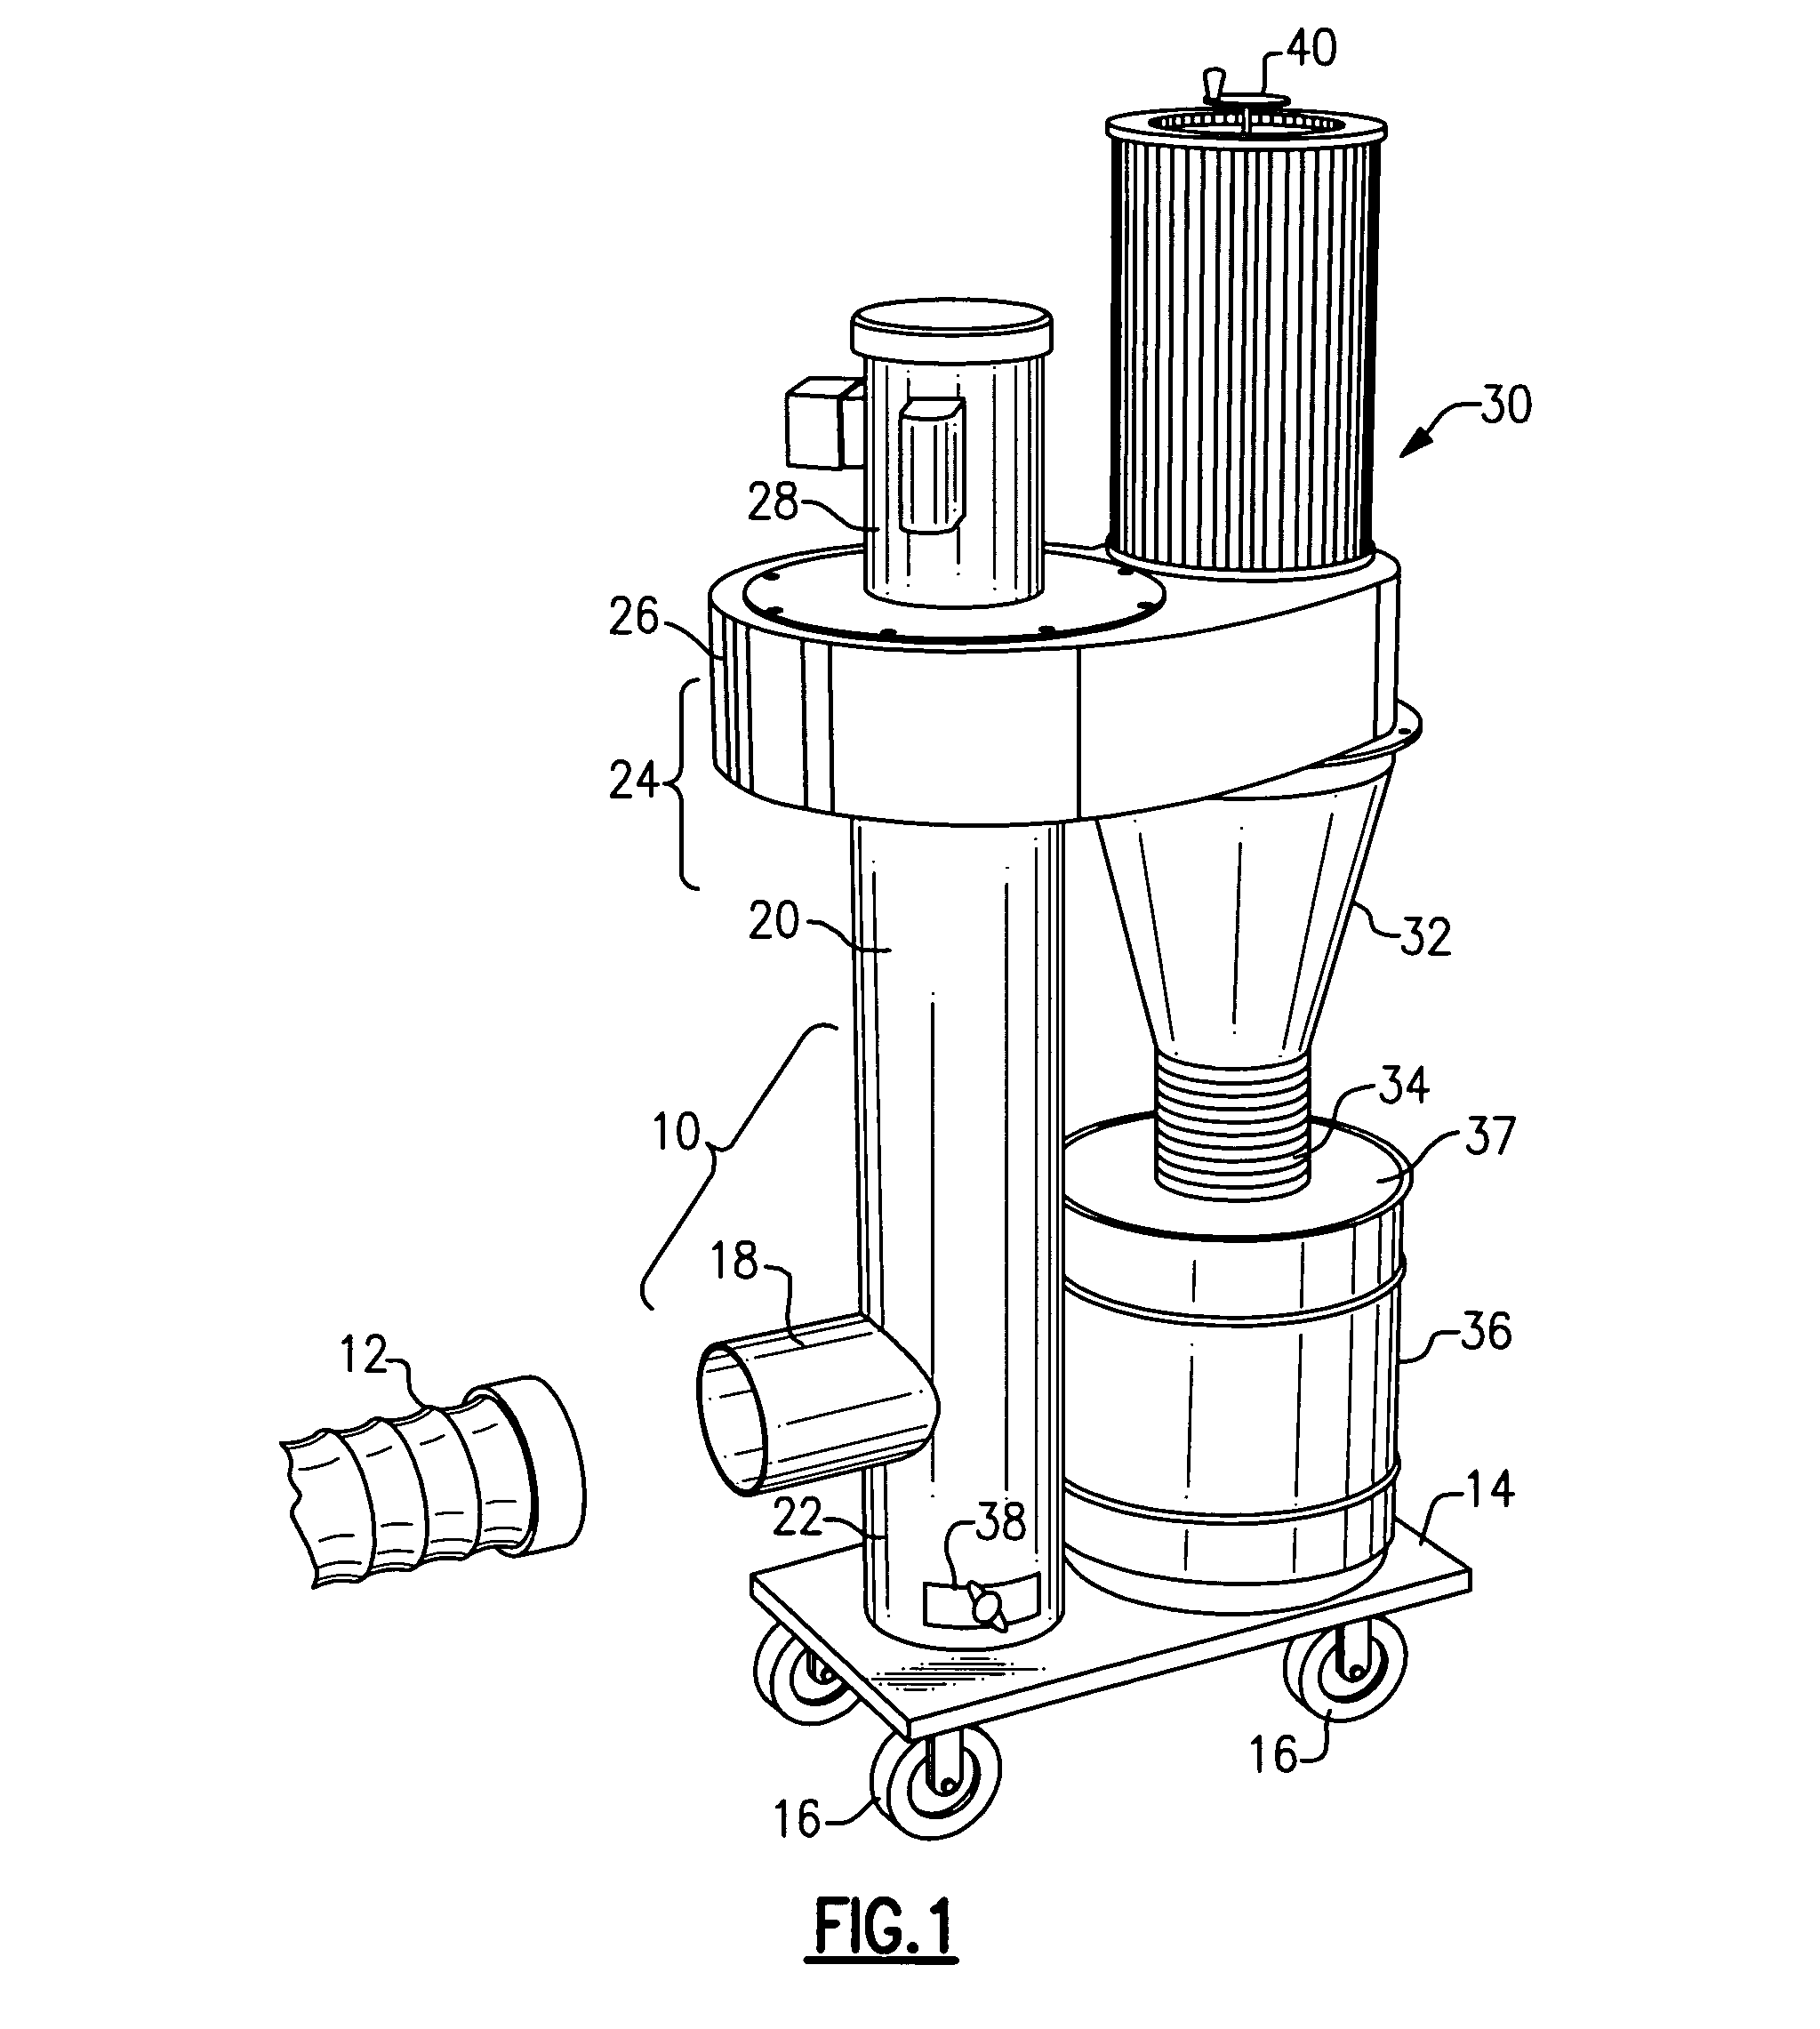 Portable cyclonic dust collection system